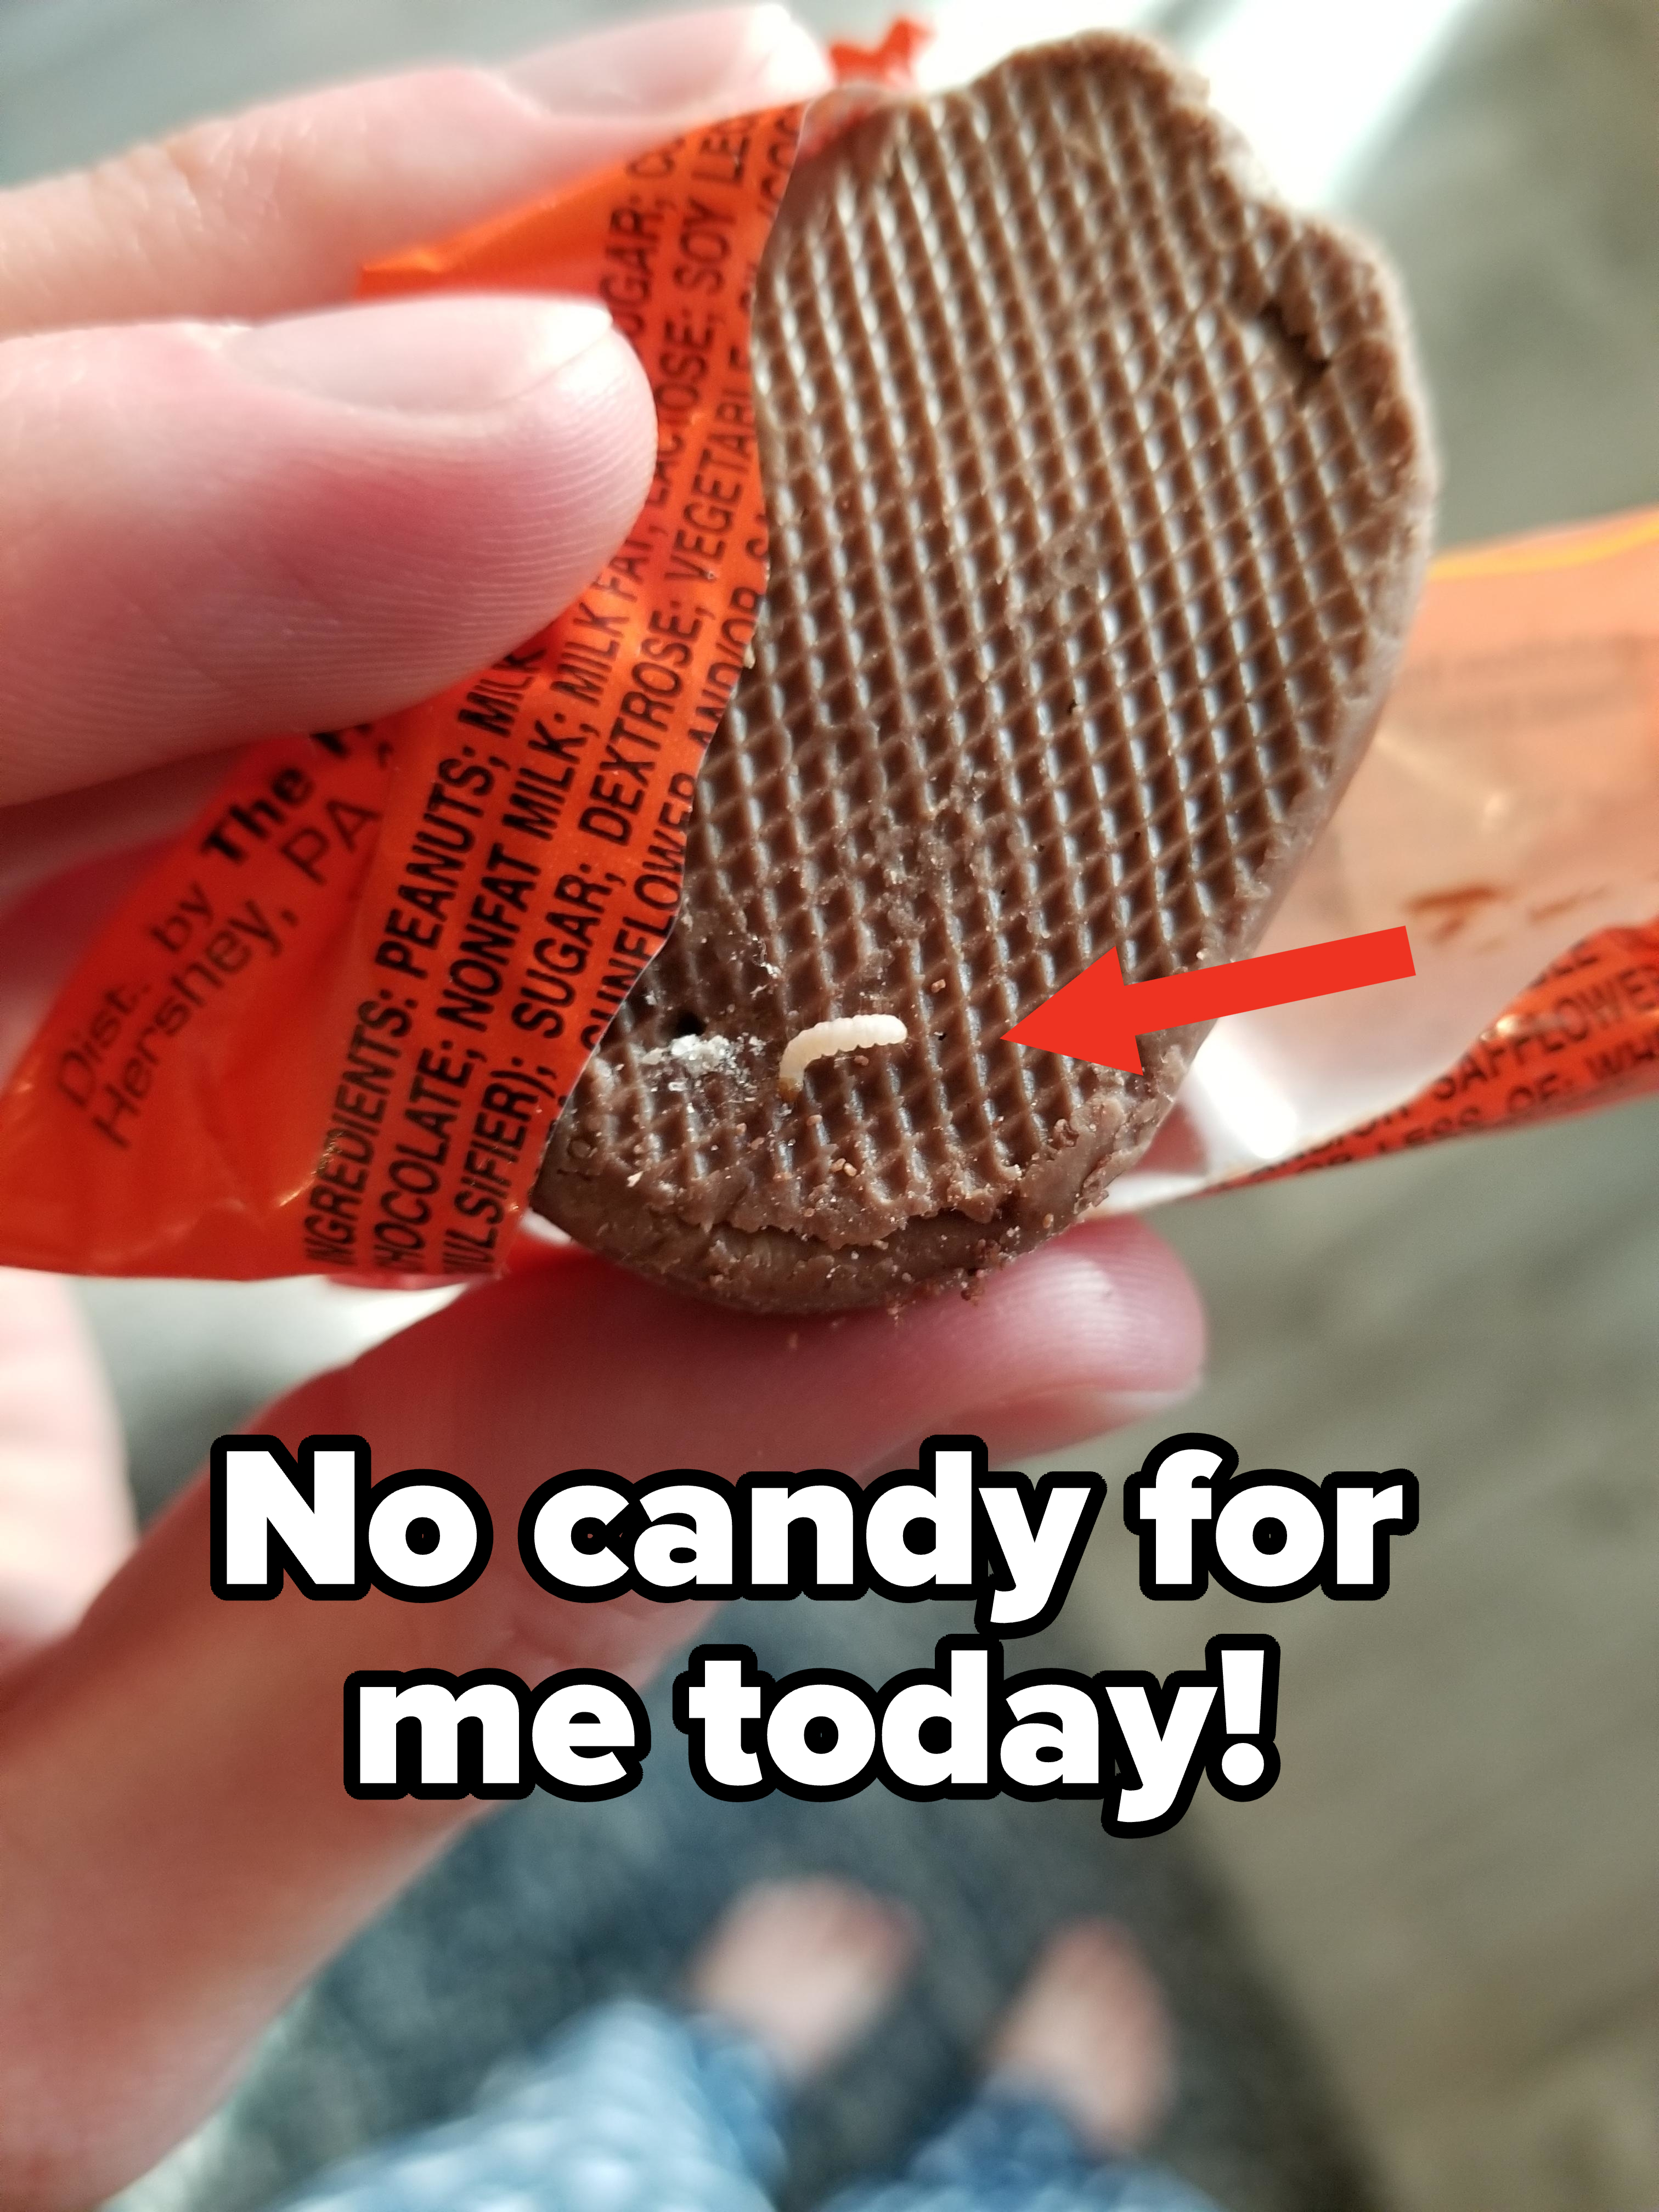 &quot;No candy for me today!&quot;